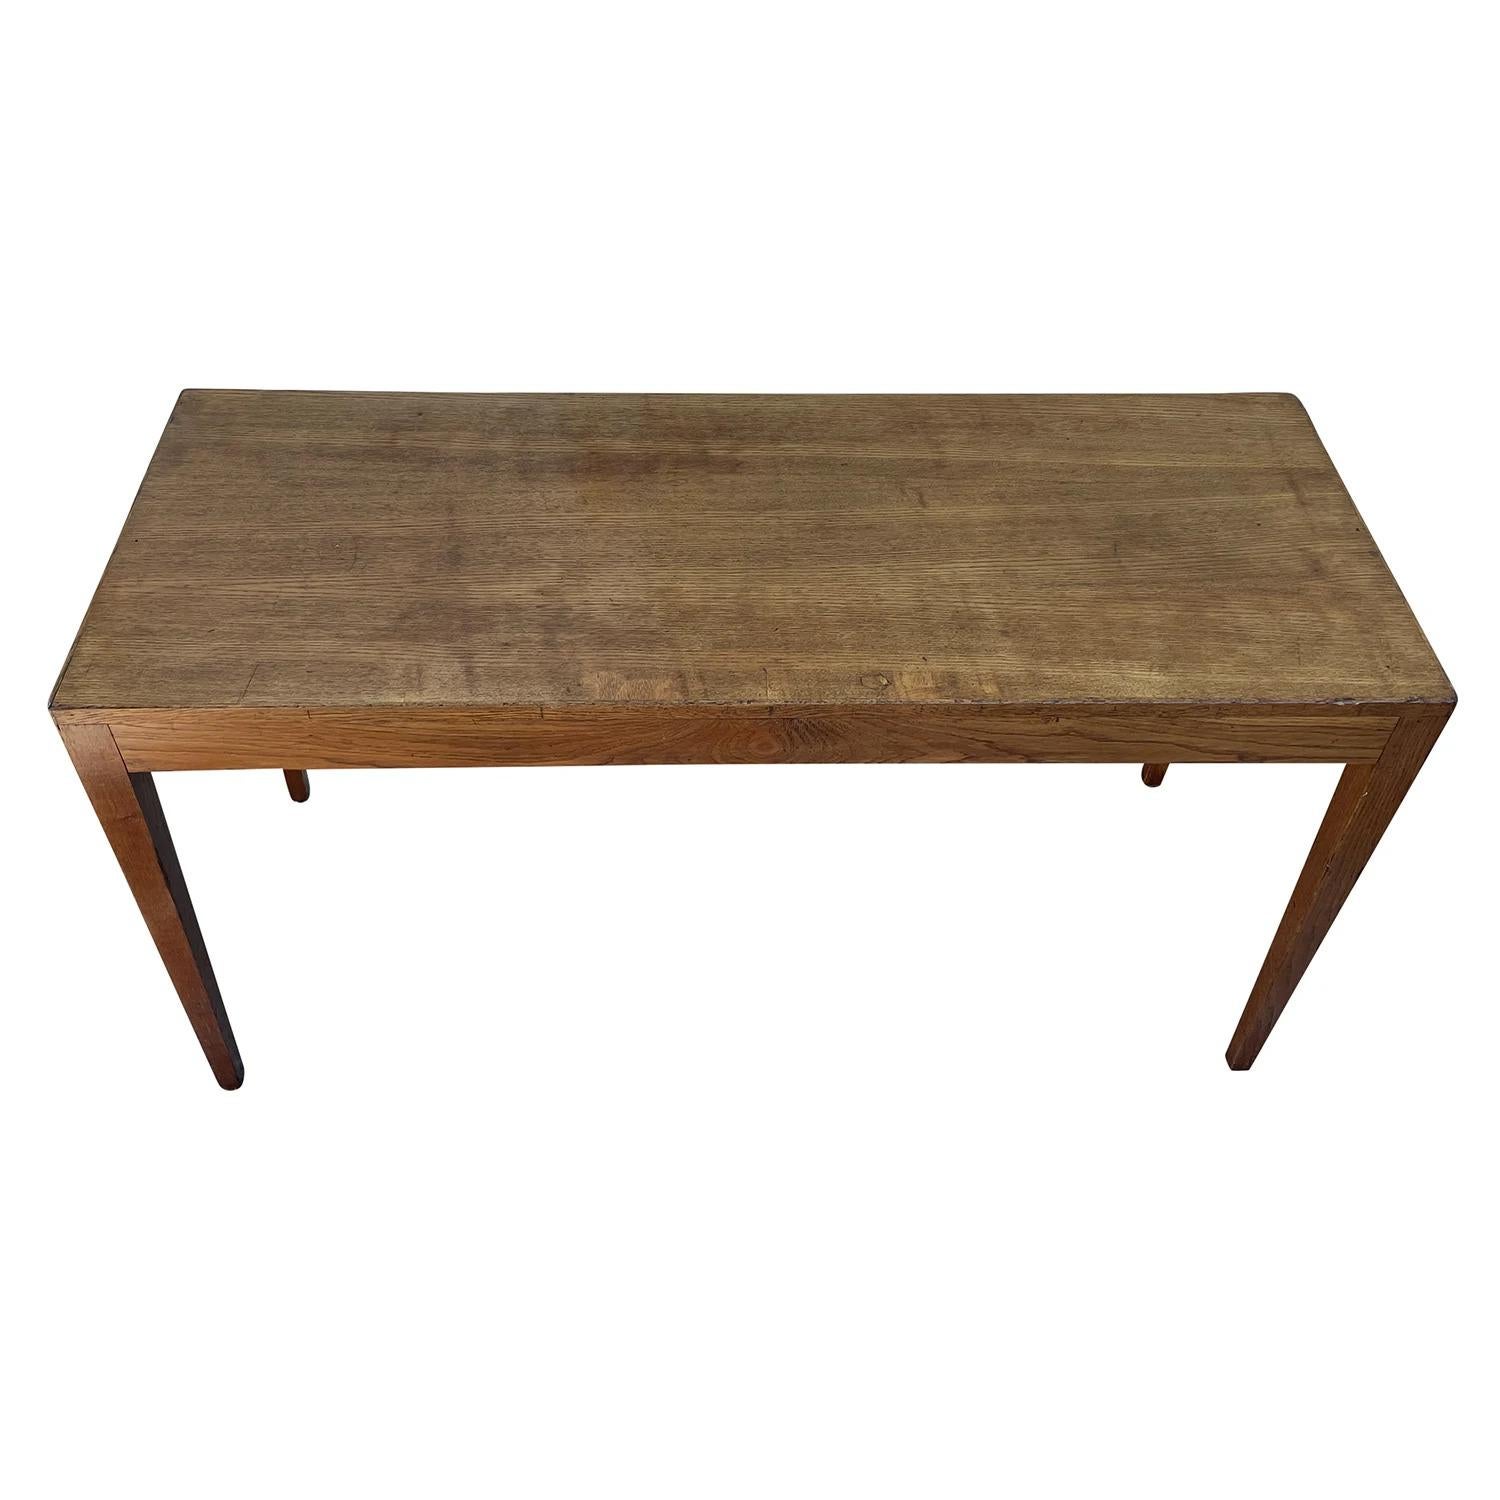 Hand-Crafted 20th Century French Oakwood Freestanding Console Table by Jean-Michel Frank